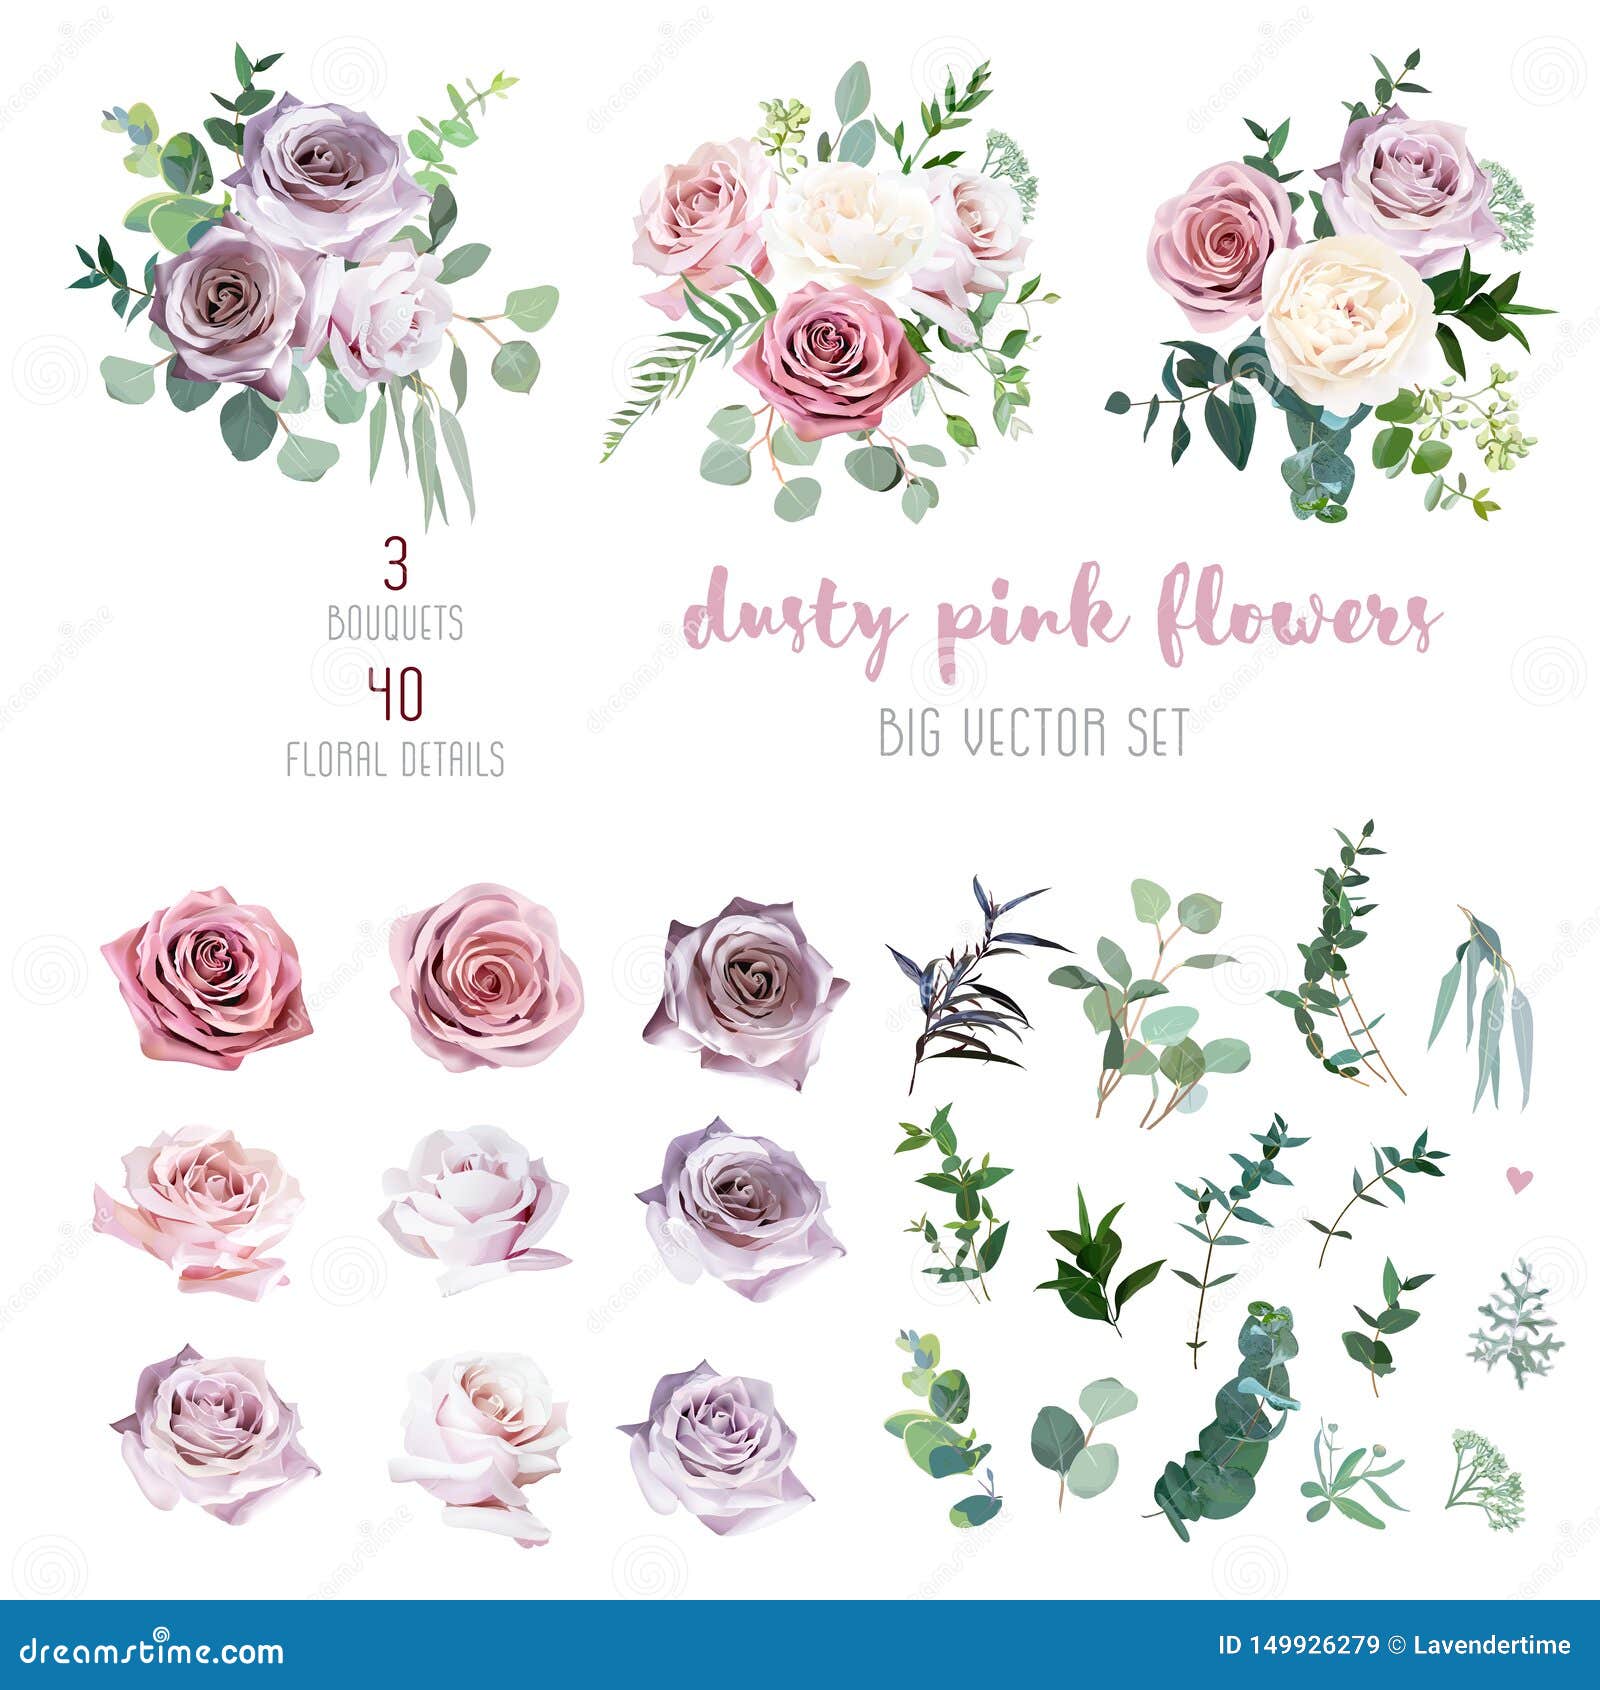 dusty pink and mauve antique rose, lavender and pale flowers, eucalyptus